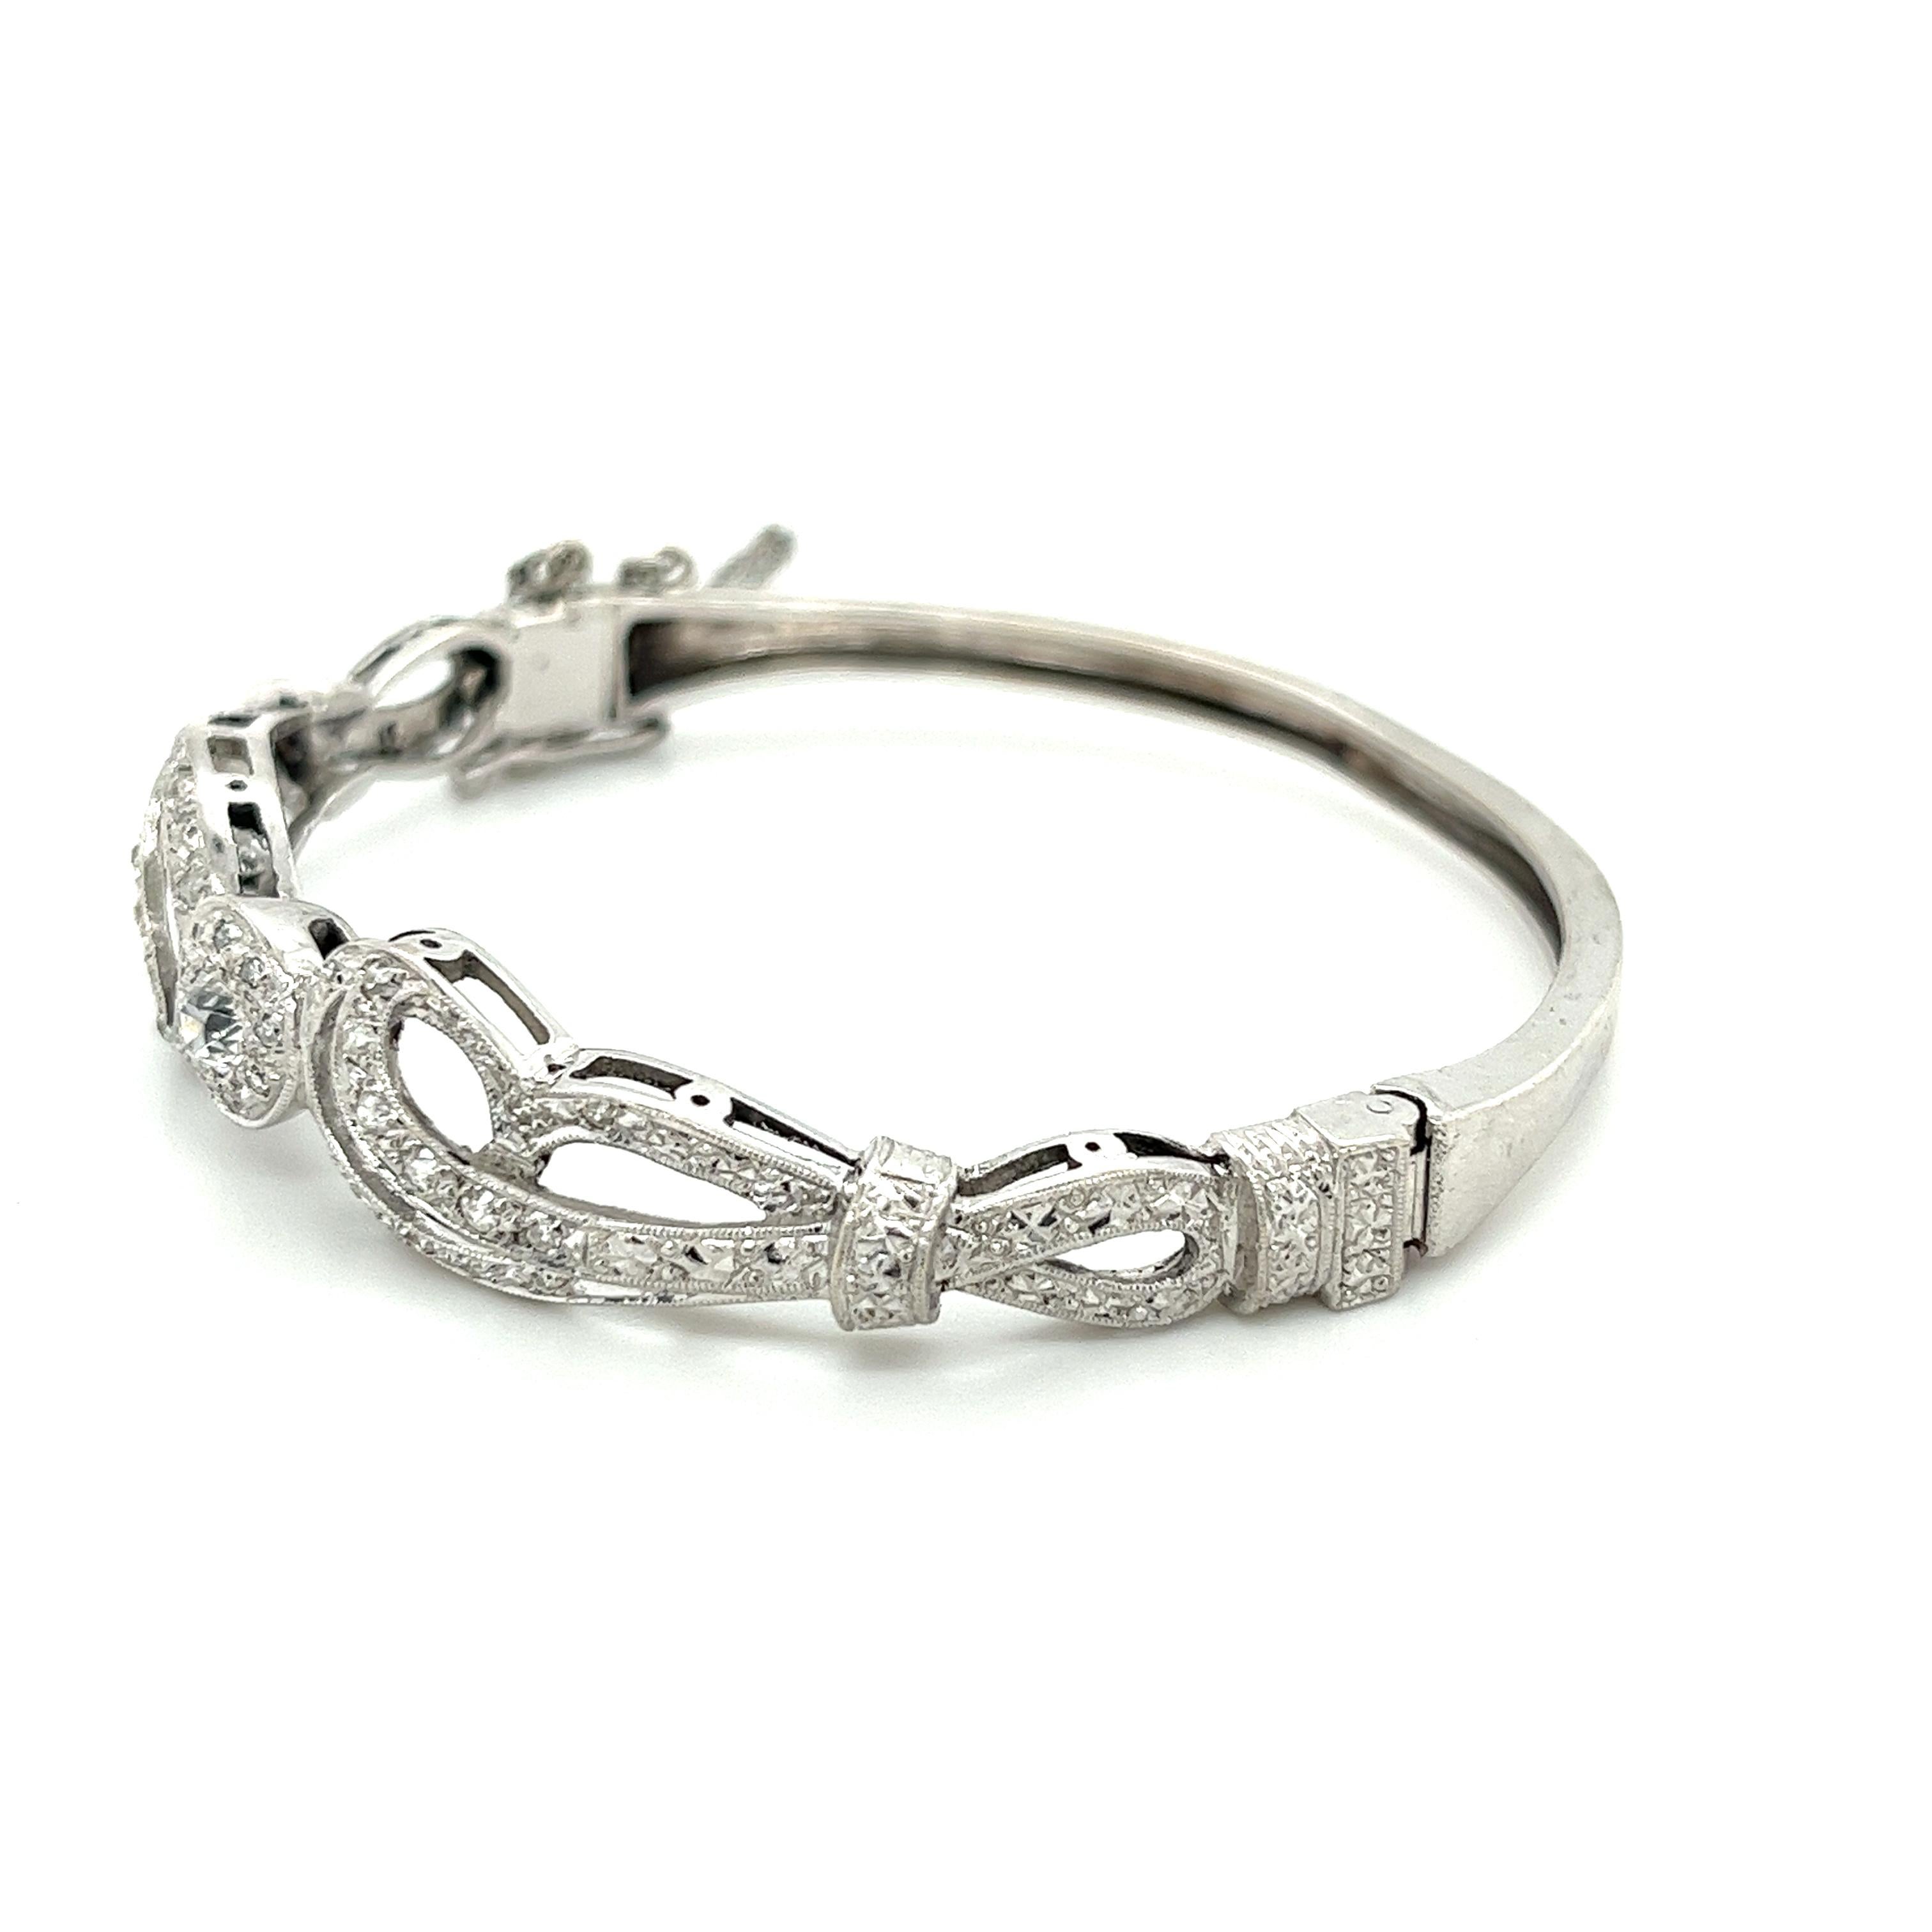 This Vintage Retro Style Diamond Bangle With Old European Cut Diamonds. Crafted in 14k White Gold, the bracelet features a total carat weight of 0.70 CTTW, with a dazzling Old European-cut diamond at its center, weighing 0.35 carats. The diamond